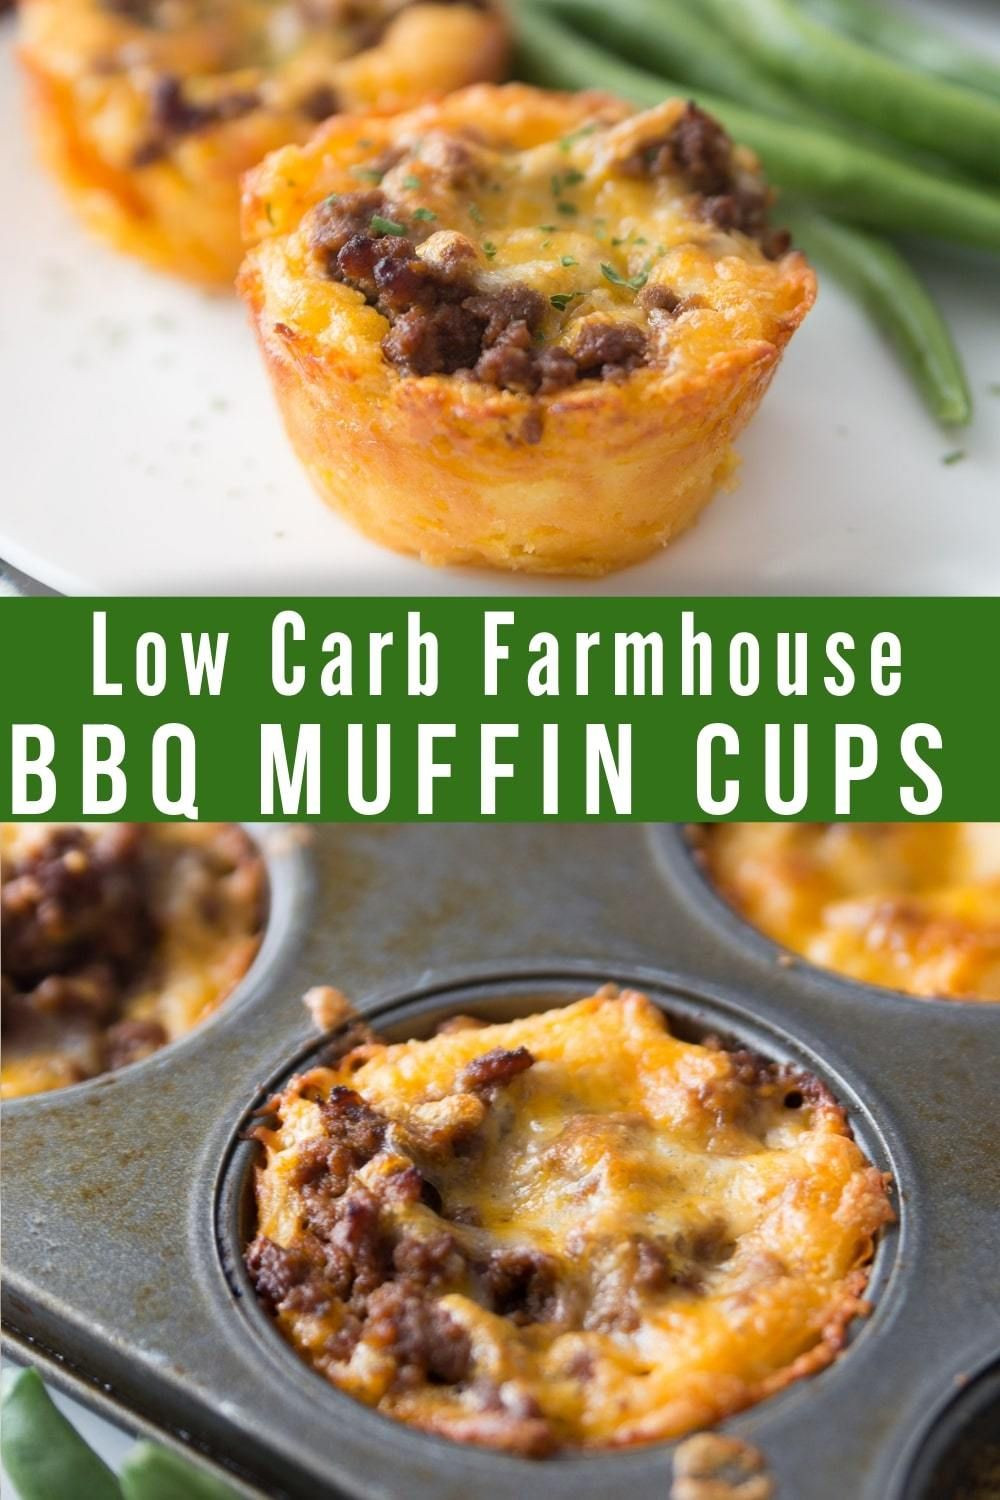 Gourmet Low Carb Recipes
 Quick & Easy Farmhouse BBQ Low Carb Muffin Cups keto low